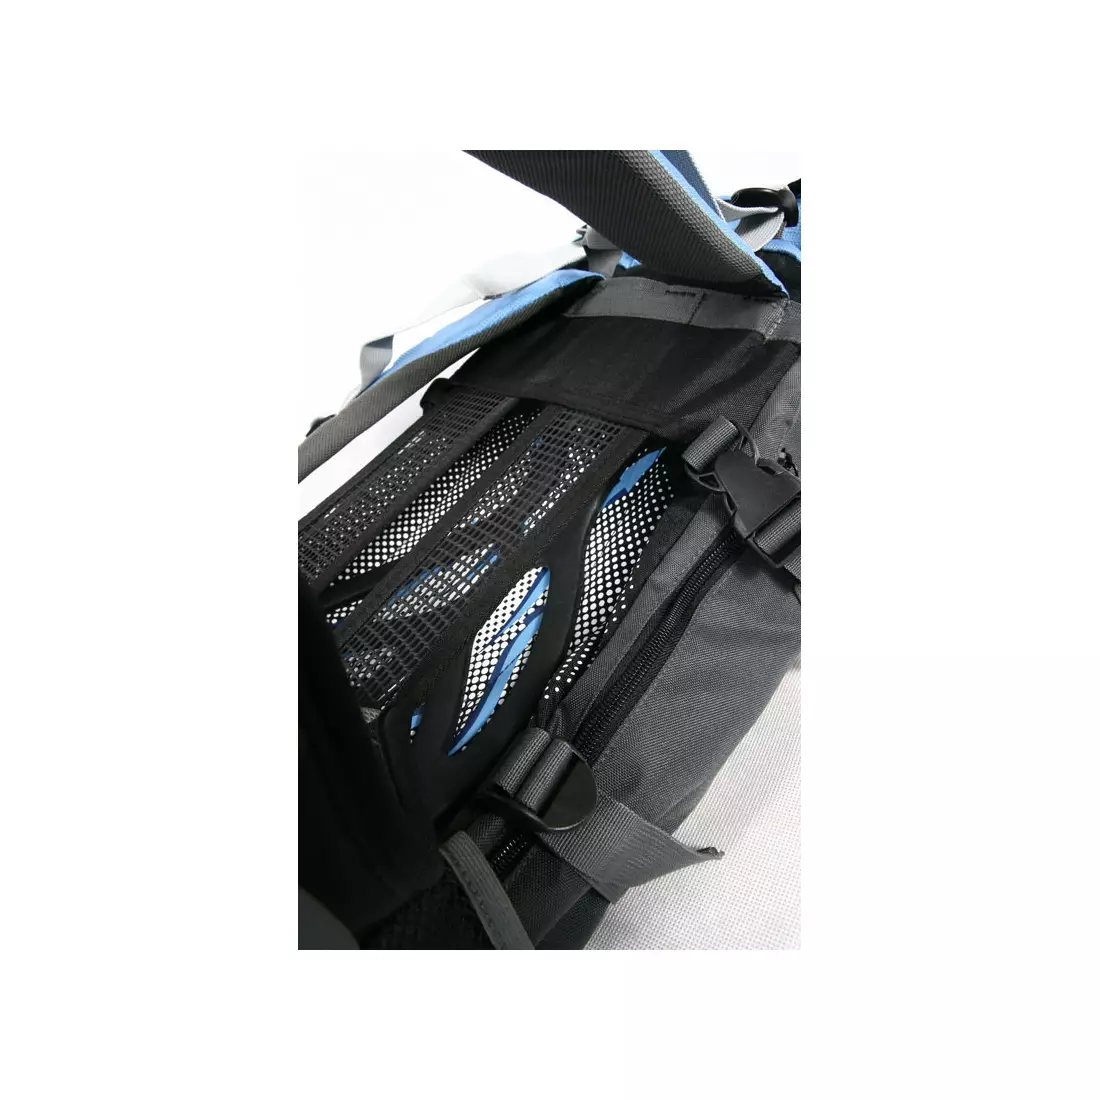 AXON SPEED - sports backpack 28L - color: Blue